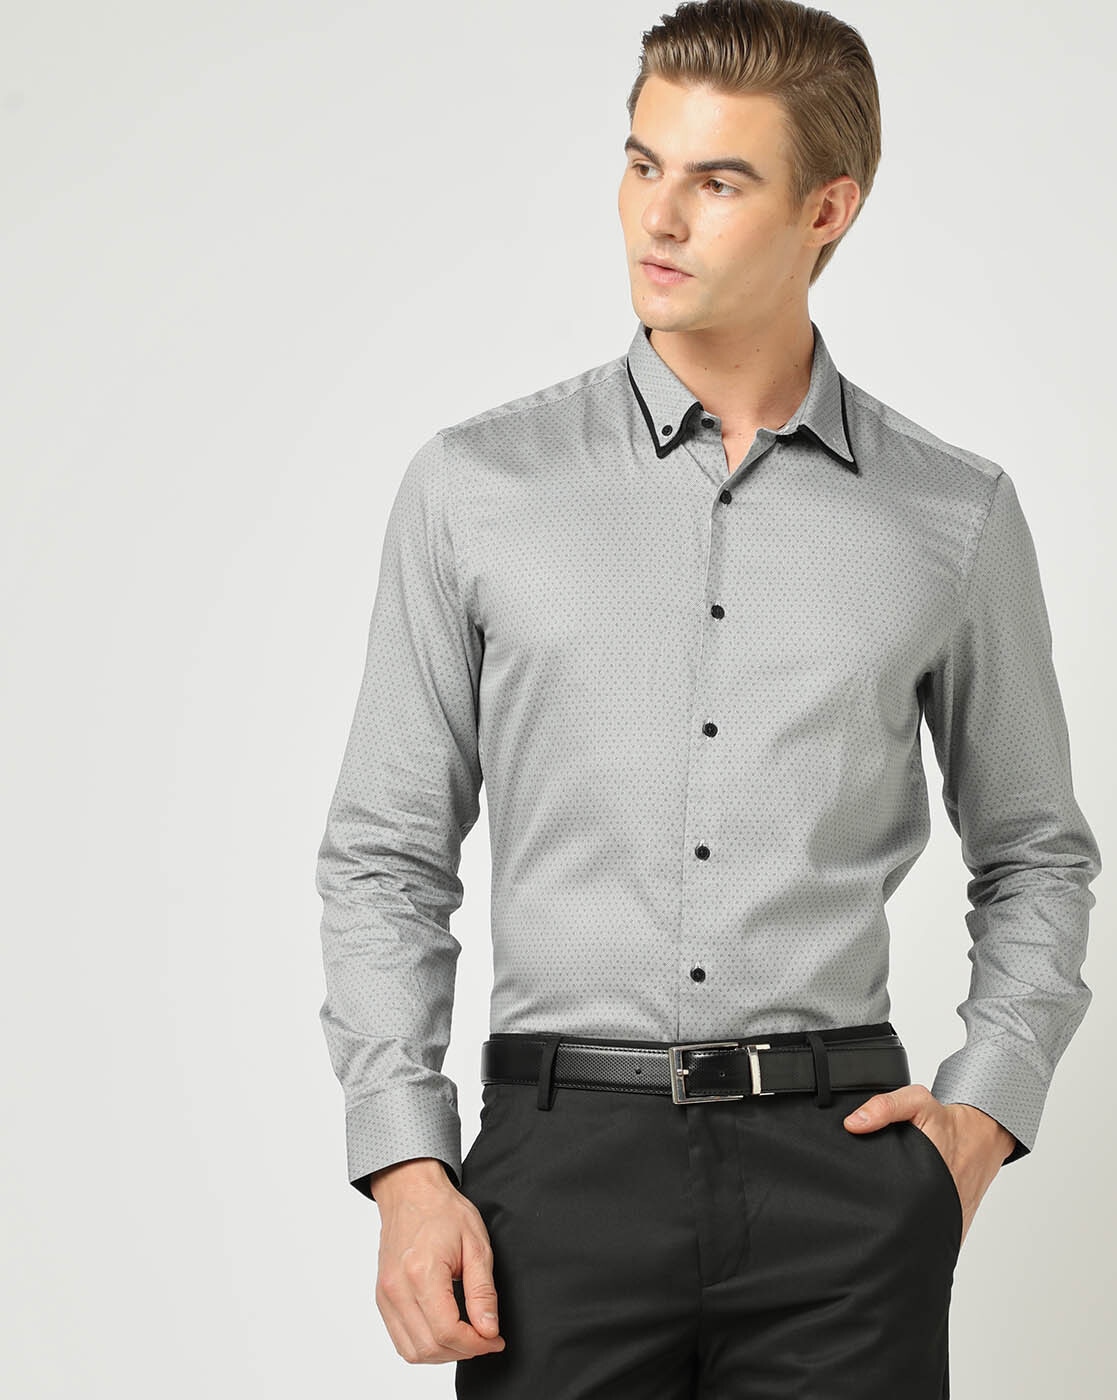 Does a black shirt match with grey pants? - Quora